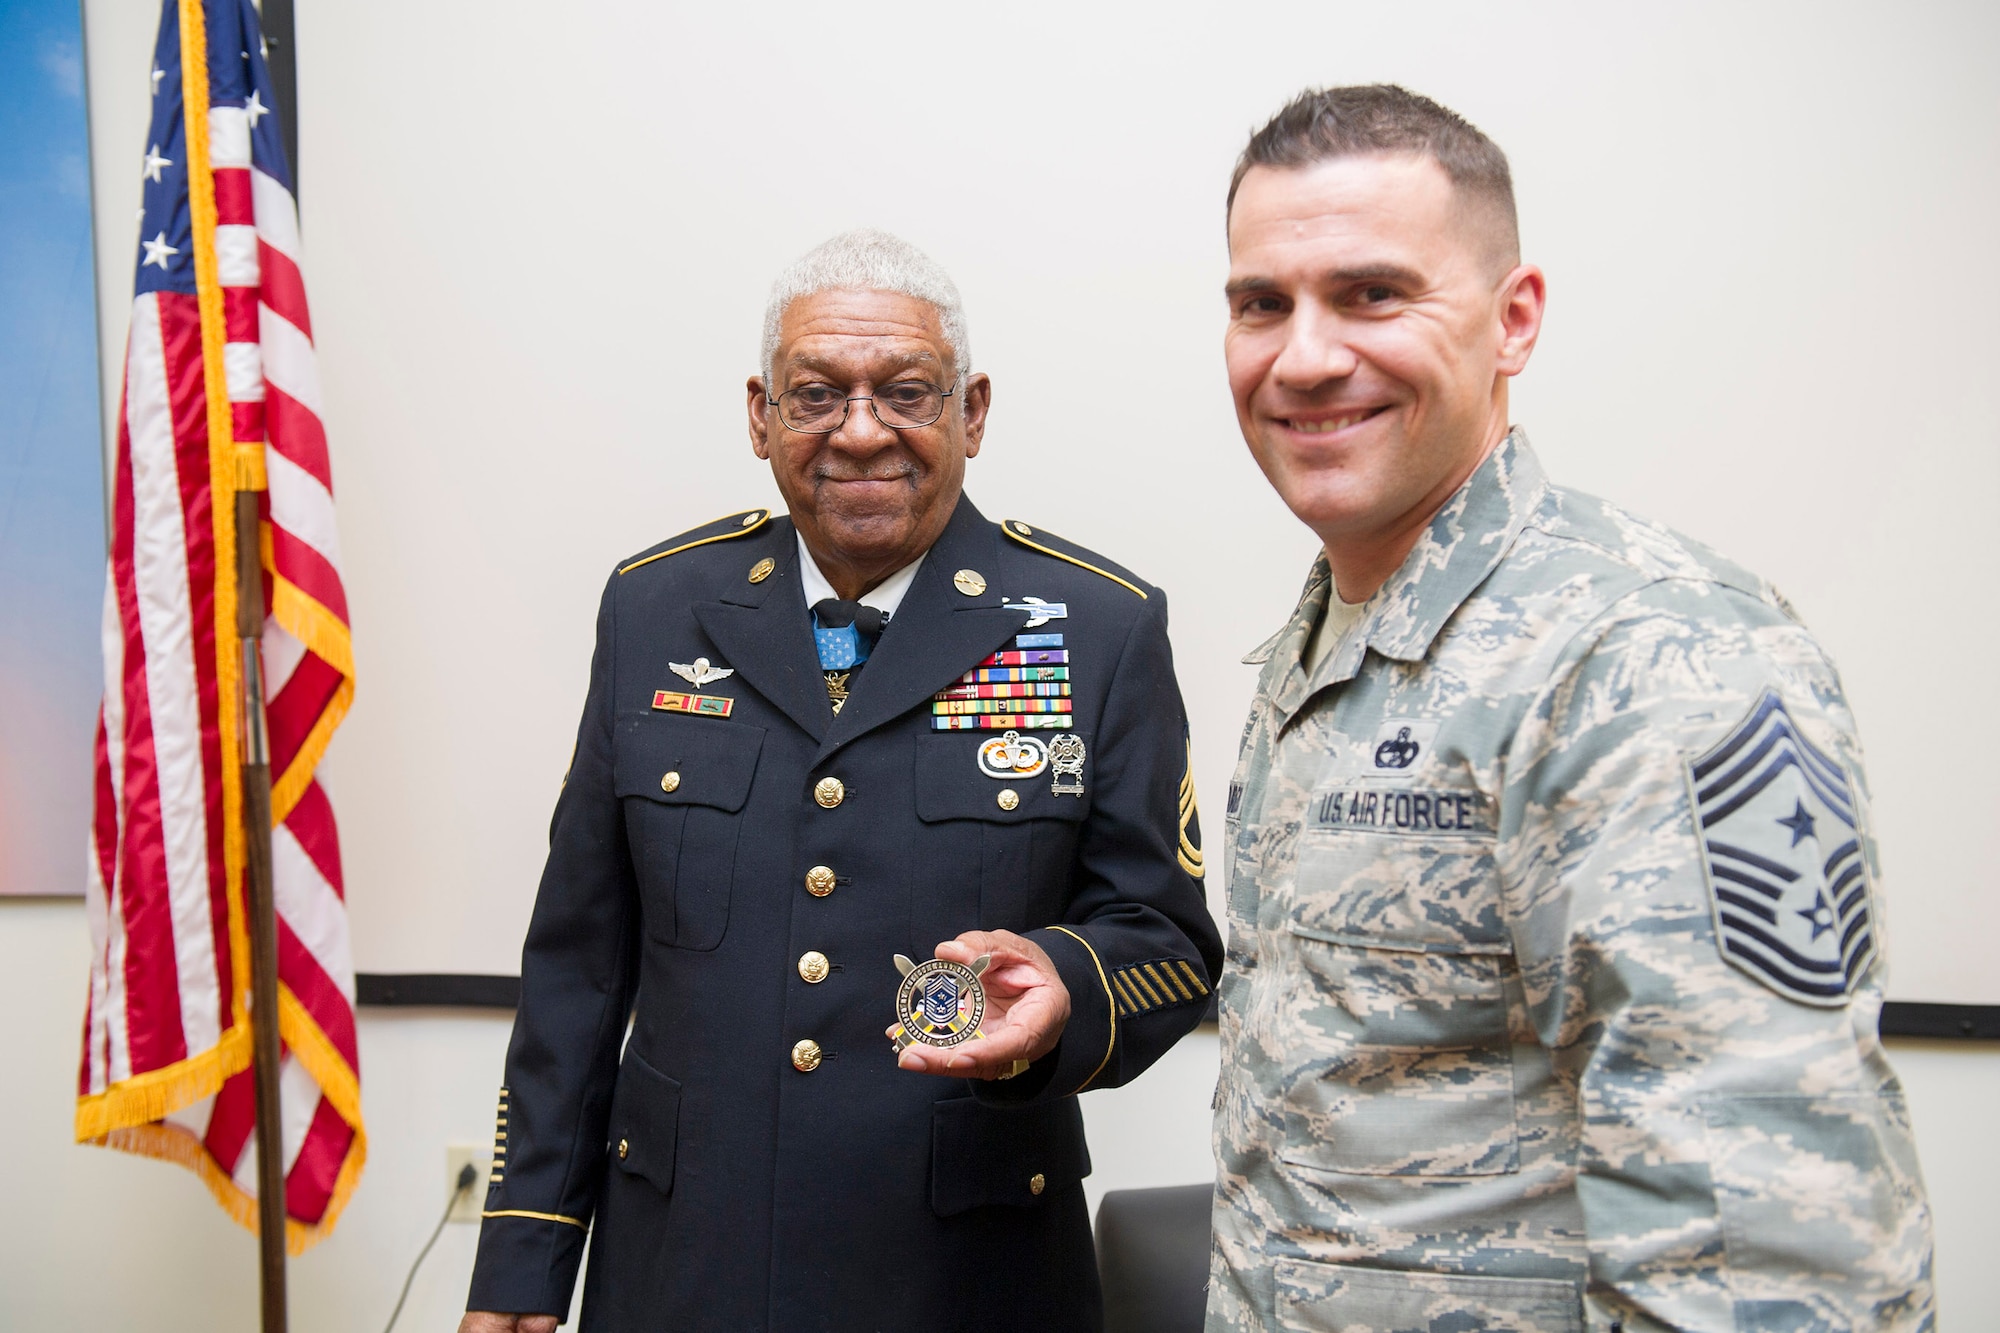 Chief Master Sgt. Jason Lamoureux, 45th Space Wing command chief, coins Medal of Honor recipient retired U.S. Army Sgt. 1st Class Melvin Morris at Patrick AFB, Fla., Jan. 31, 2017. Lamoureux thanked him for his bravery, courage and inspirational message to our service members on the power of the human spirit. (U.S. Air Force photo by Phil Sunkel)